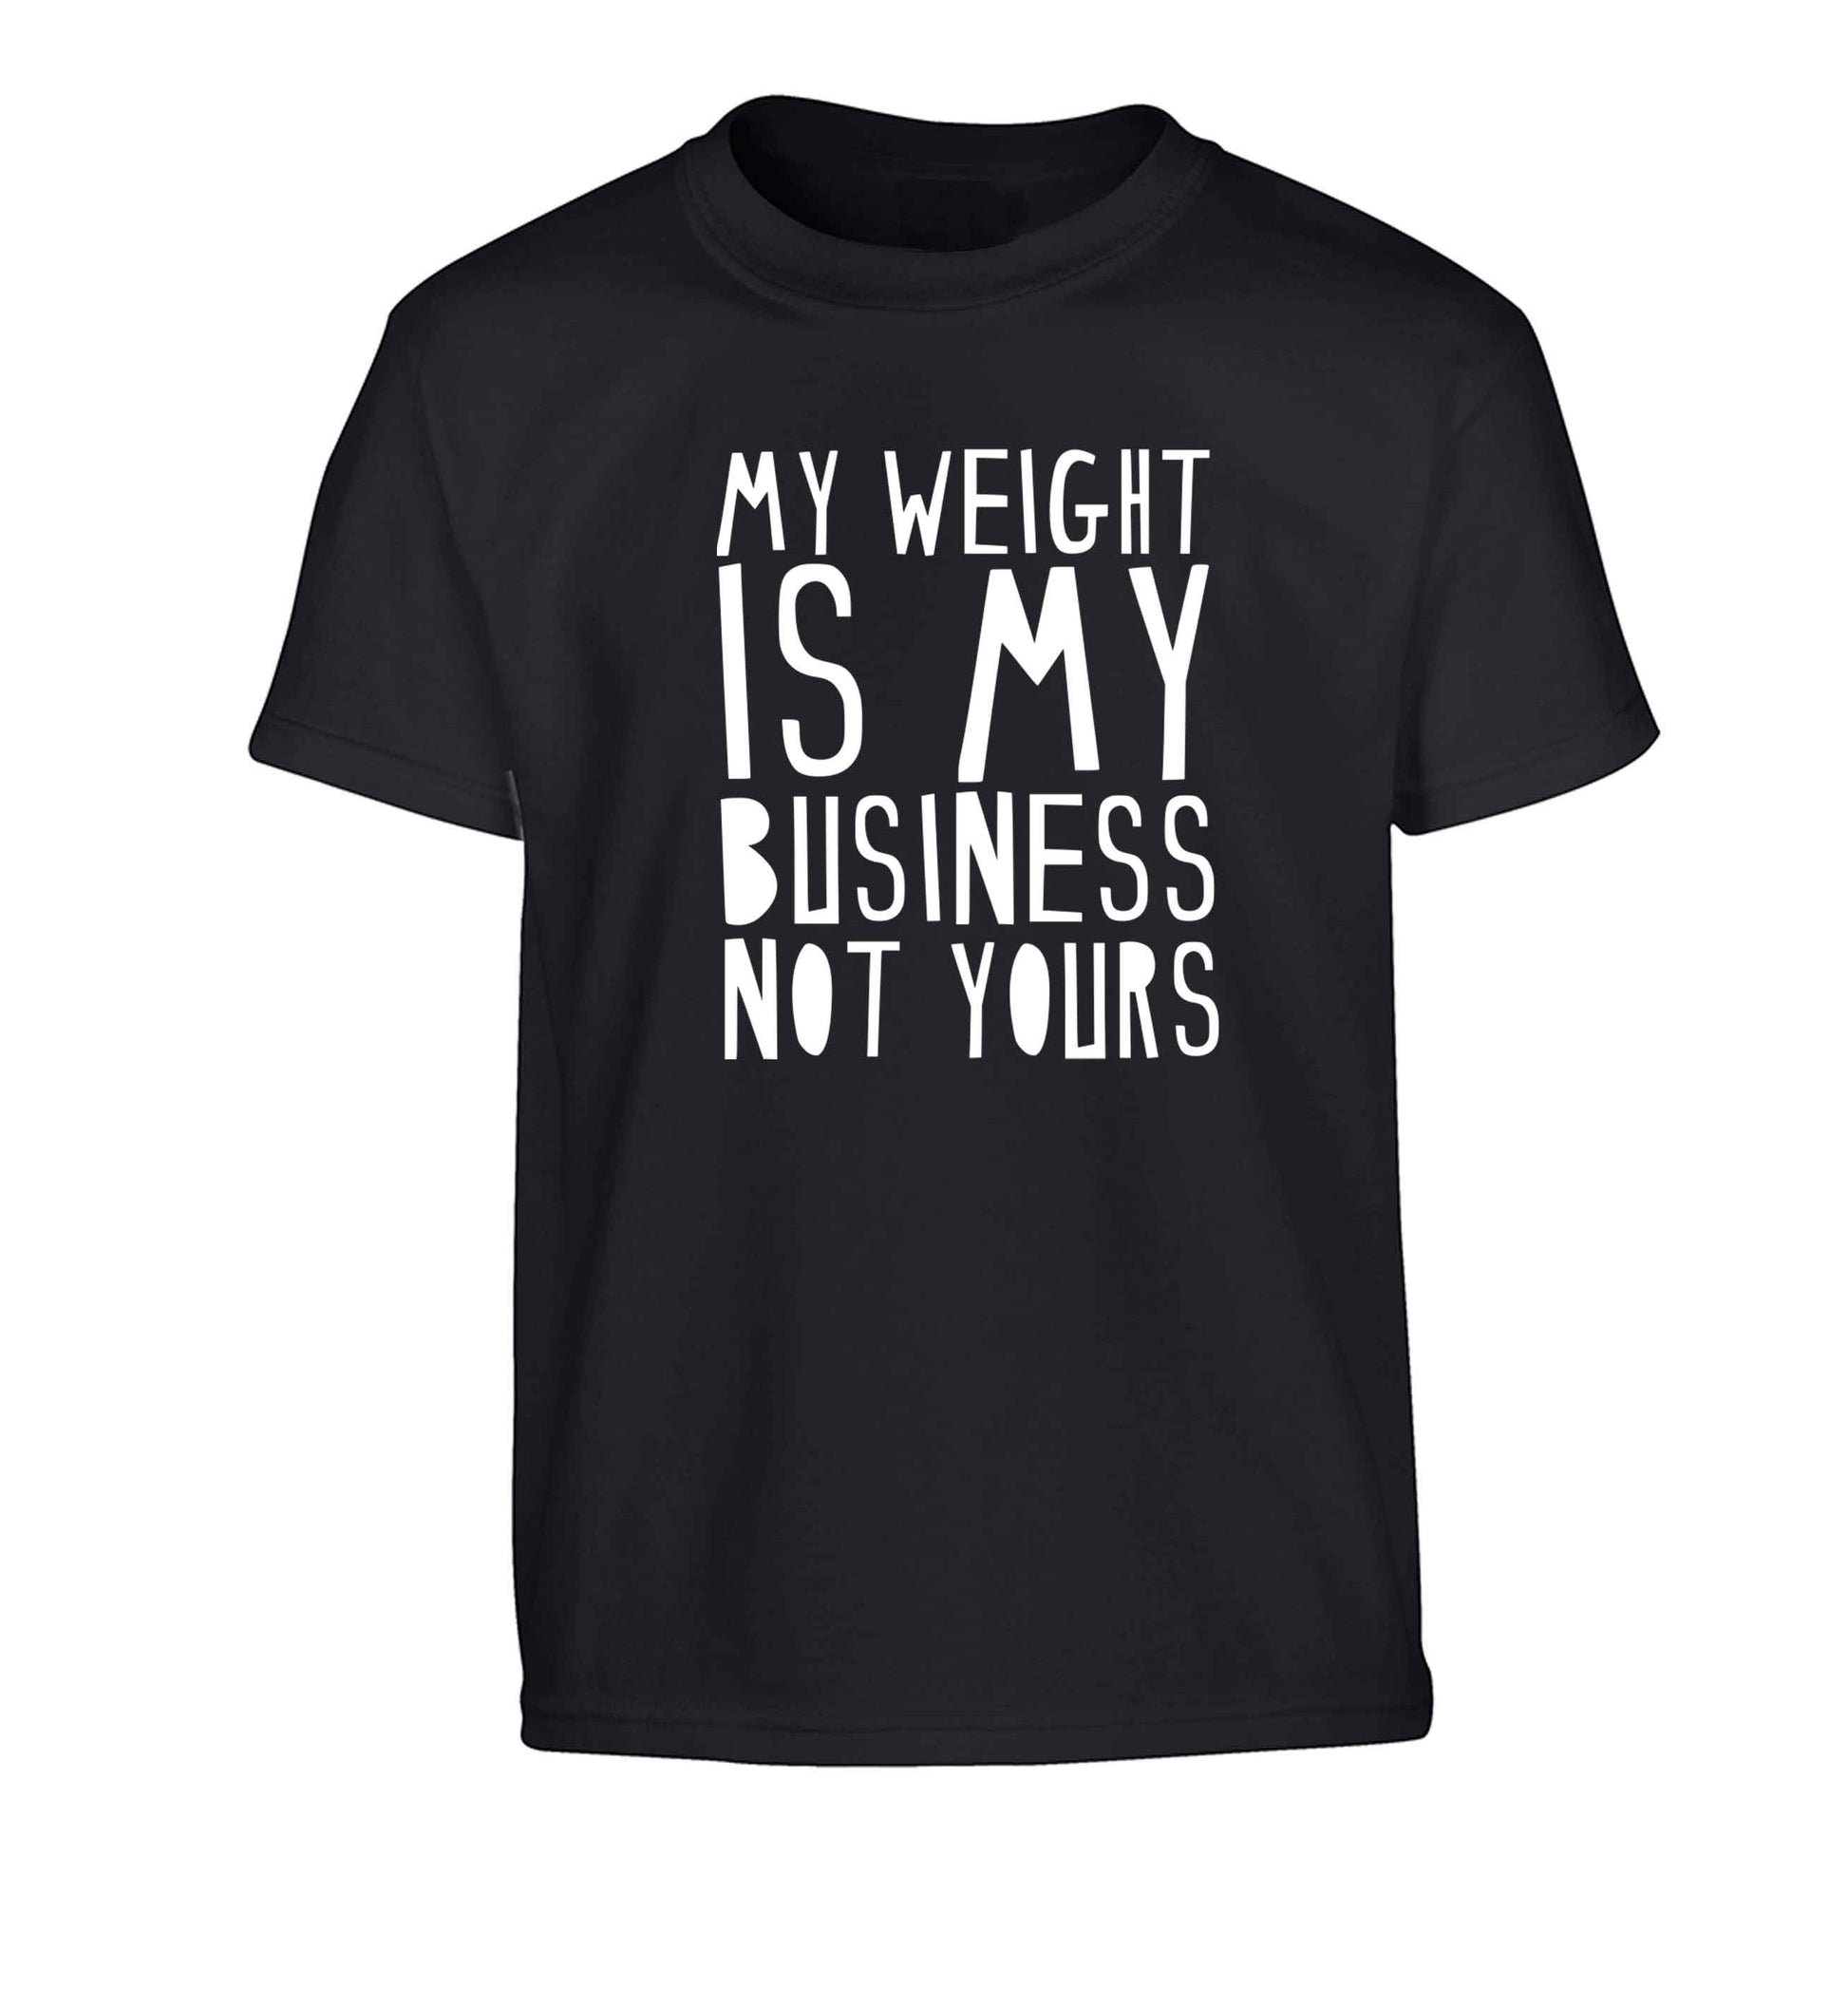 My weight is my business not yours Children's black Tshirt 12-13 Years